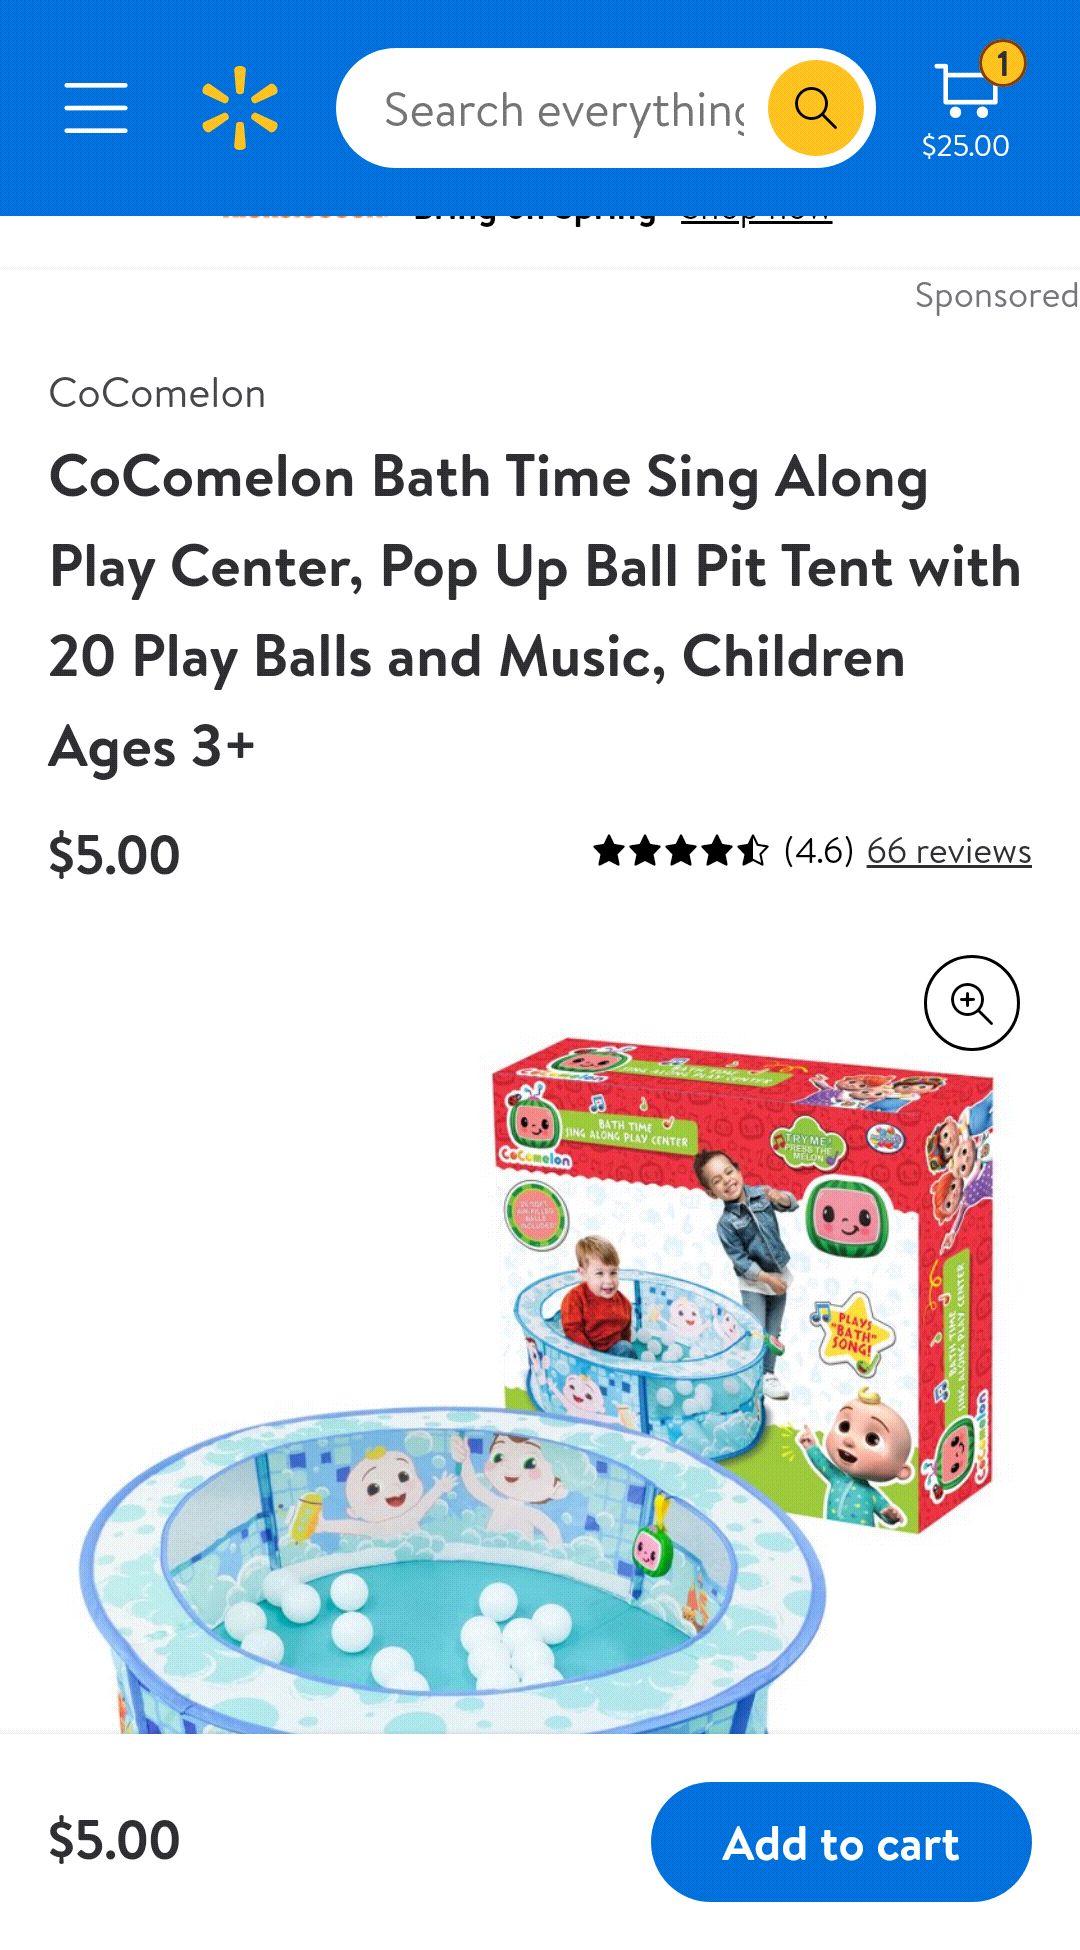 CoComelon沐浴游戏中心  Bath Time Sing Along Play Center, Pop Up Ball Pit Tent with 20 Play Balls and Music, Children Ages 3+ - Walmart.com